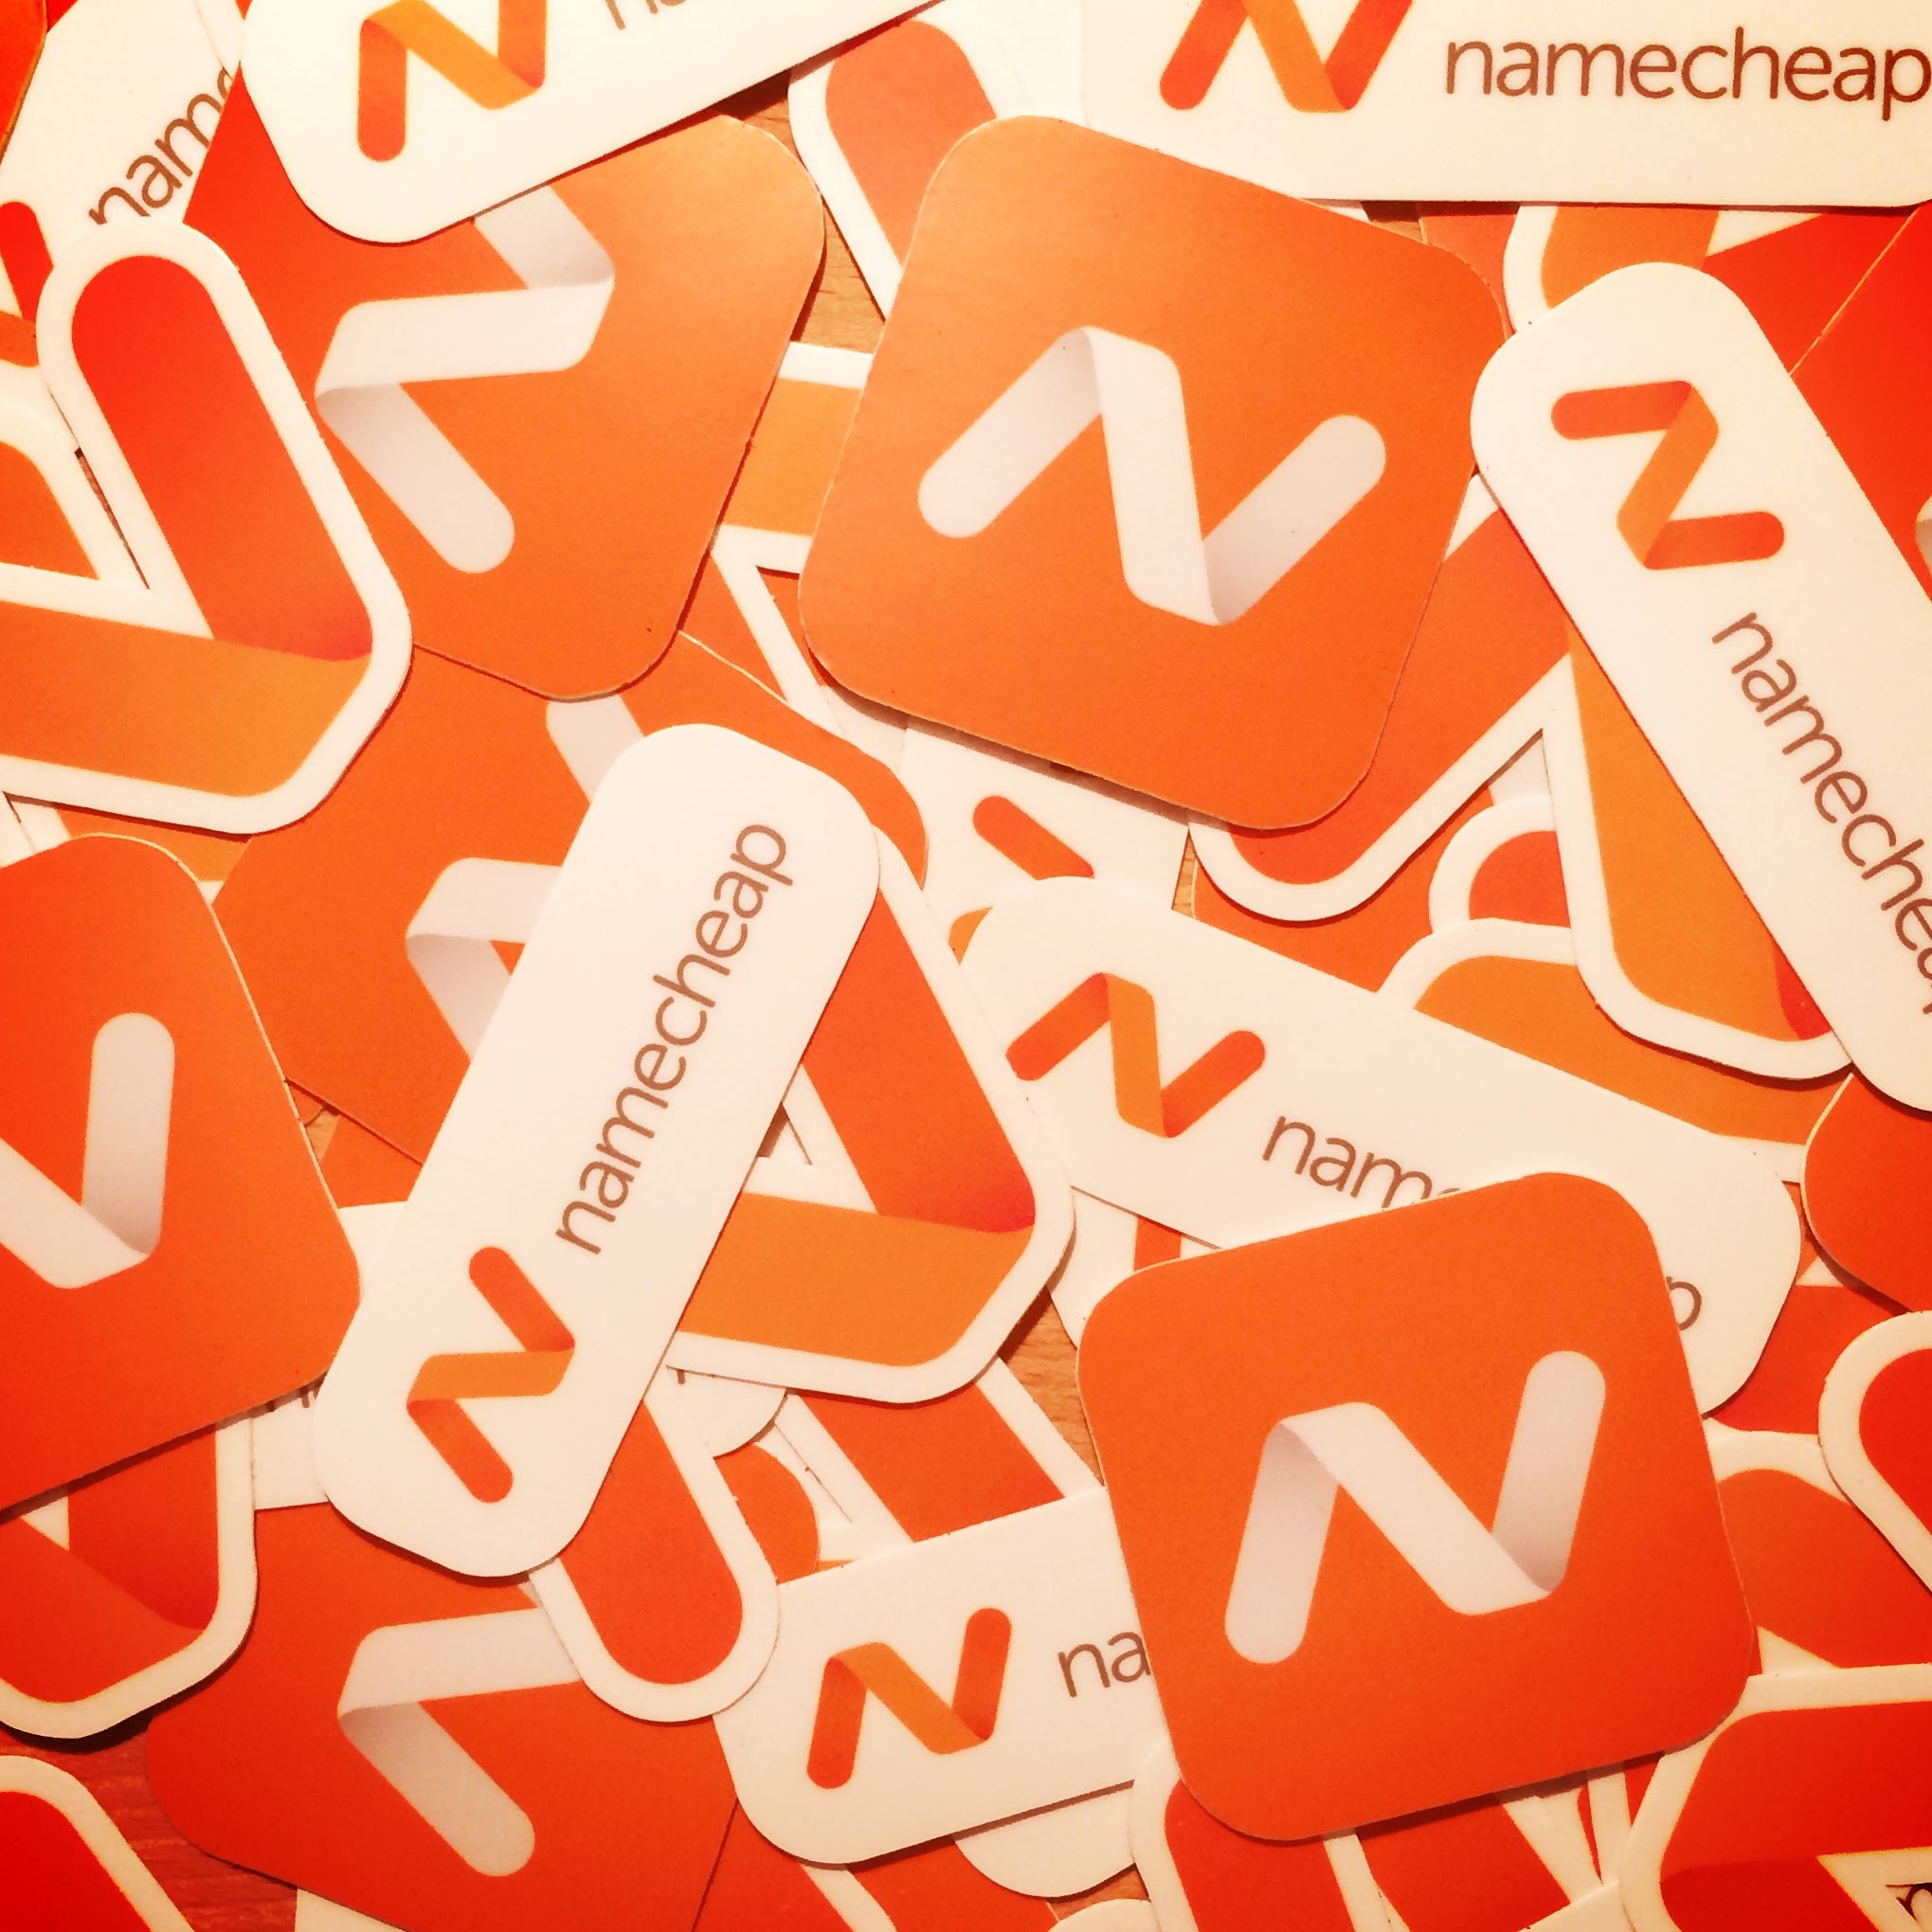 Best Selling Shopify Products on merch.namecheap.com-5